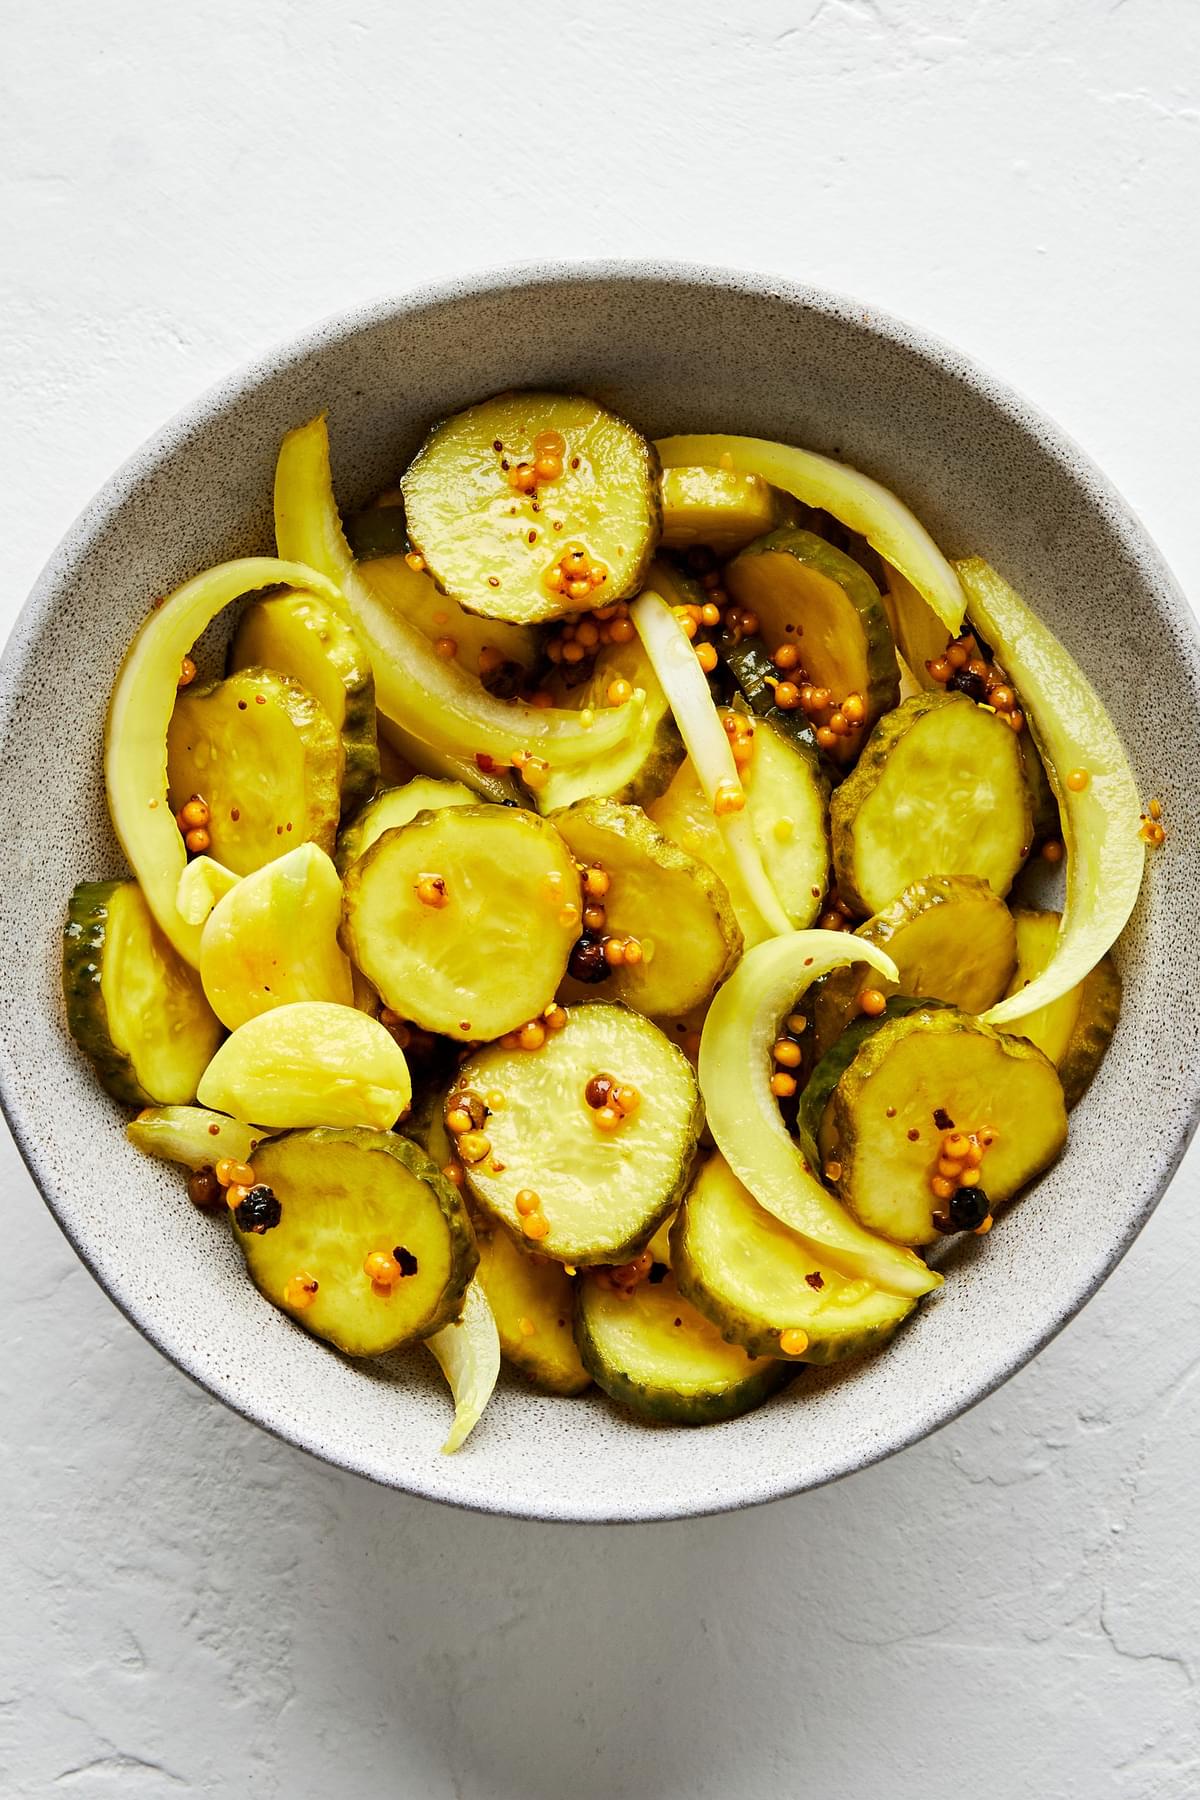 homemade bread and butter pickles in a bowl